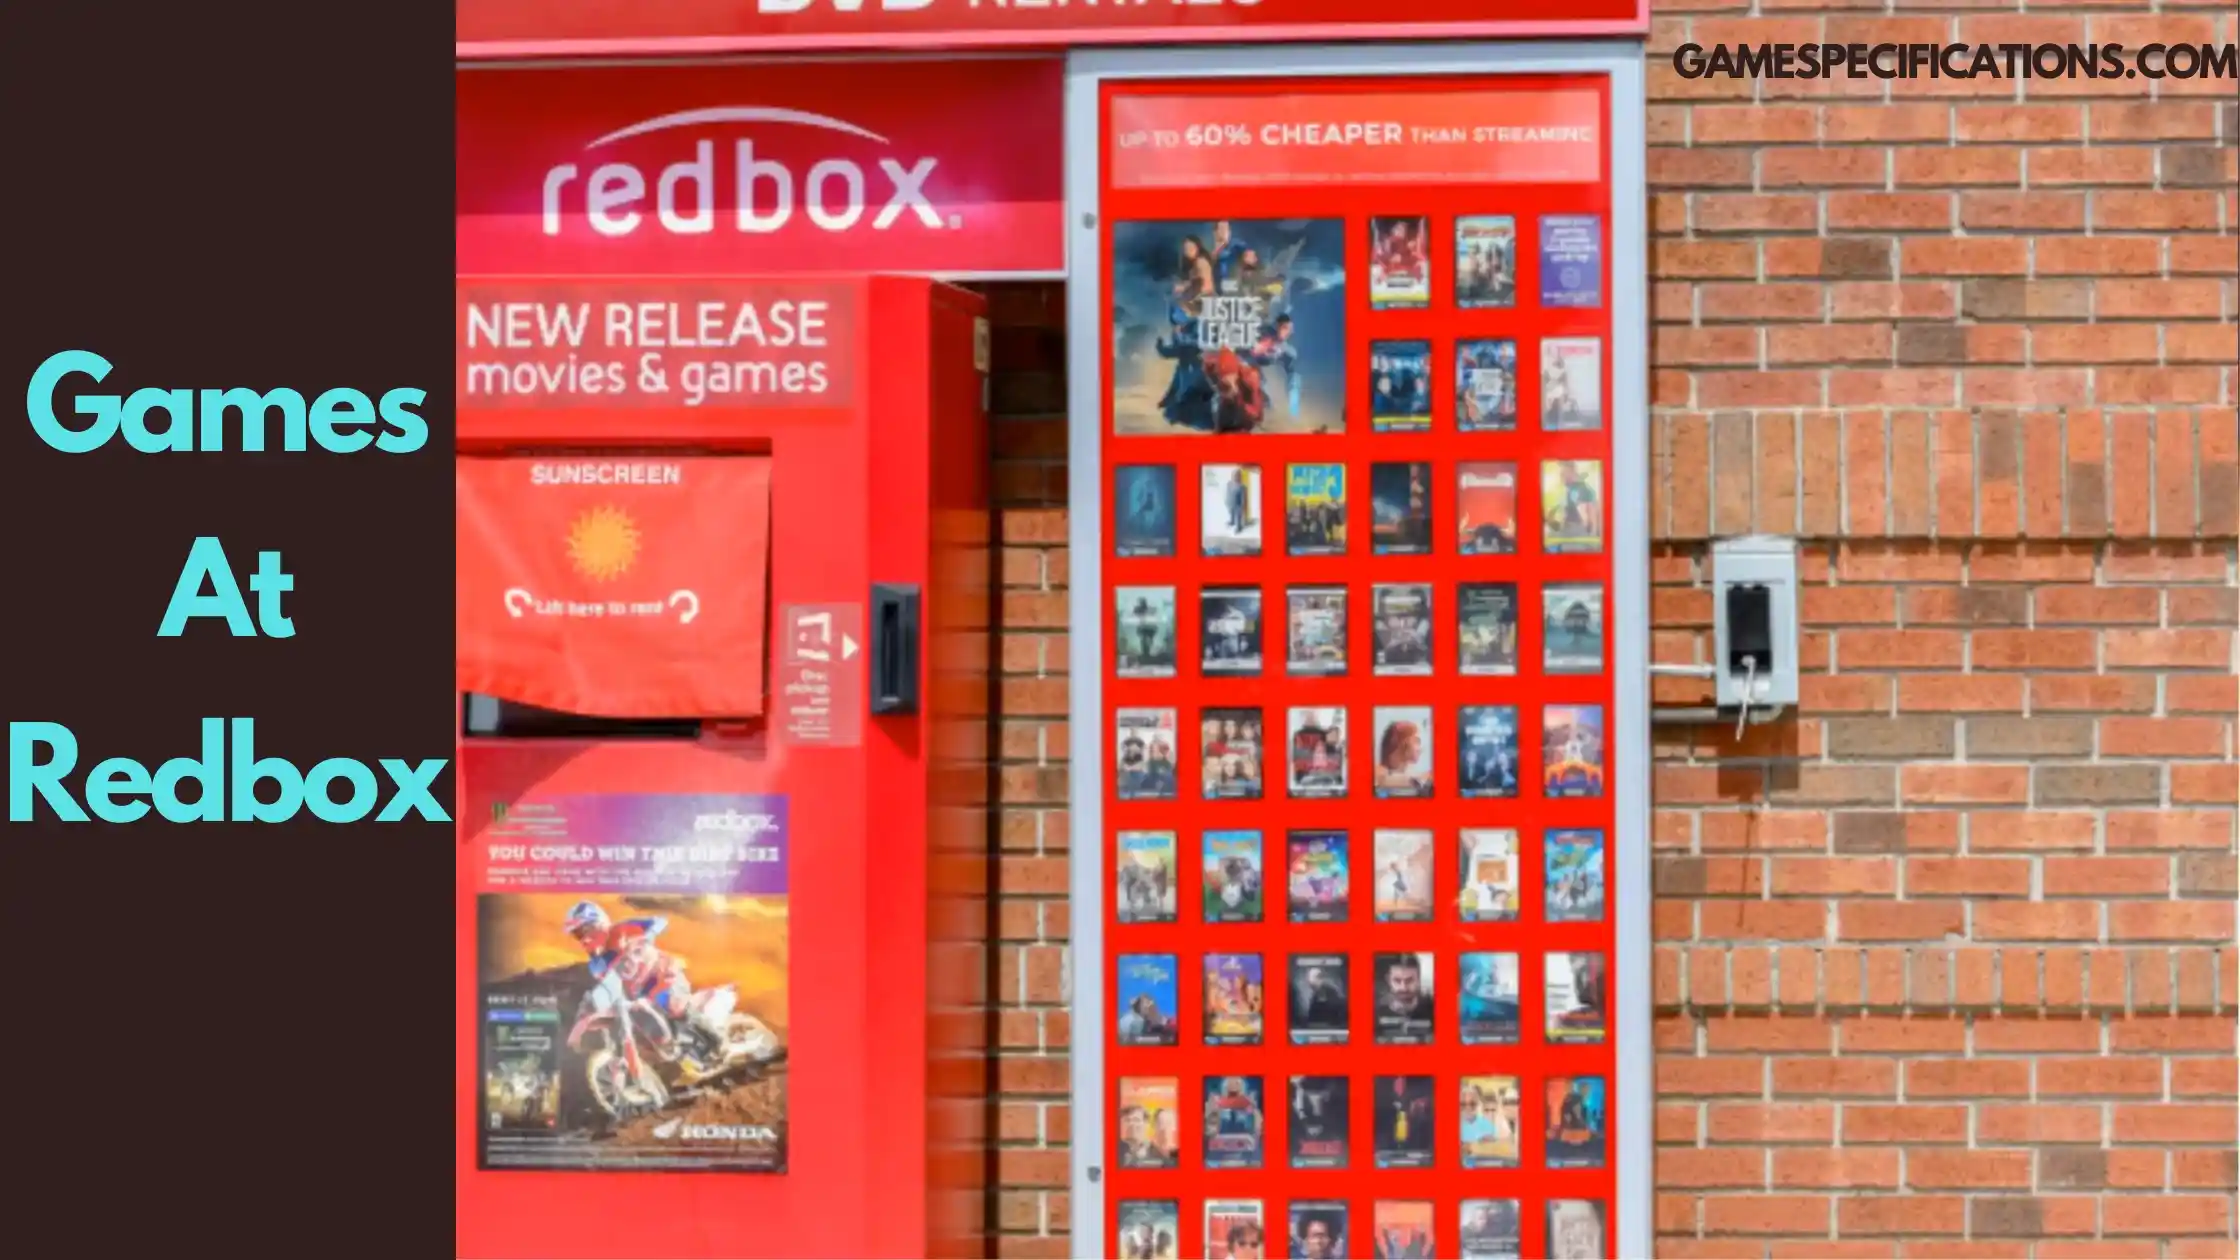 6 Exciting Games at Redbox That You Should Consider Playing